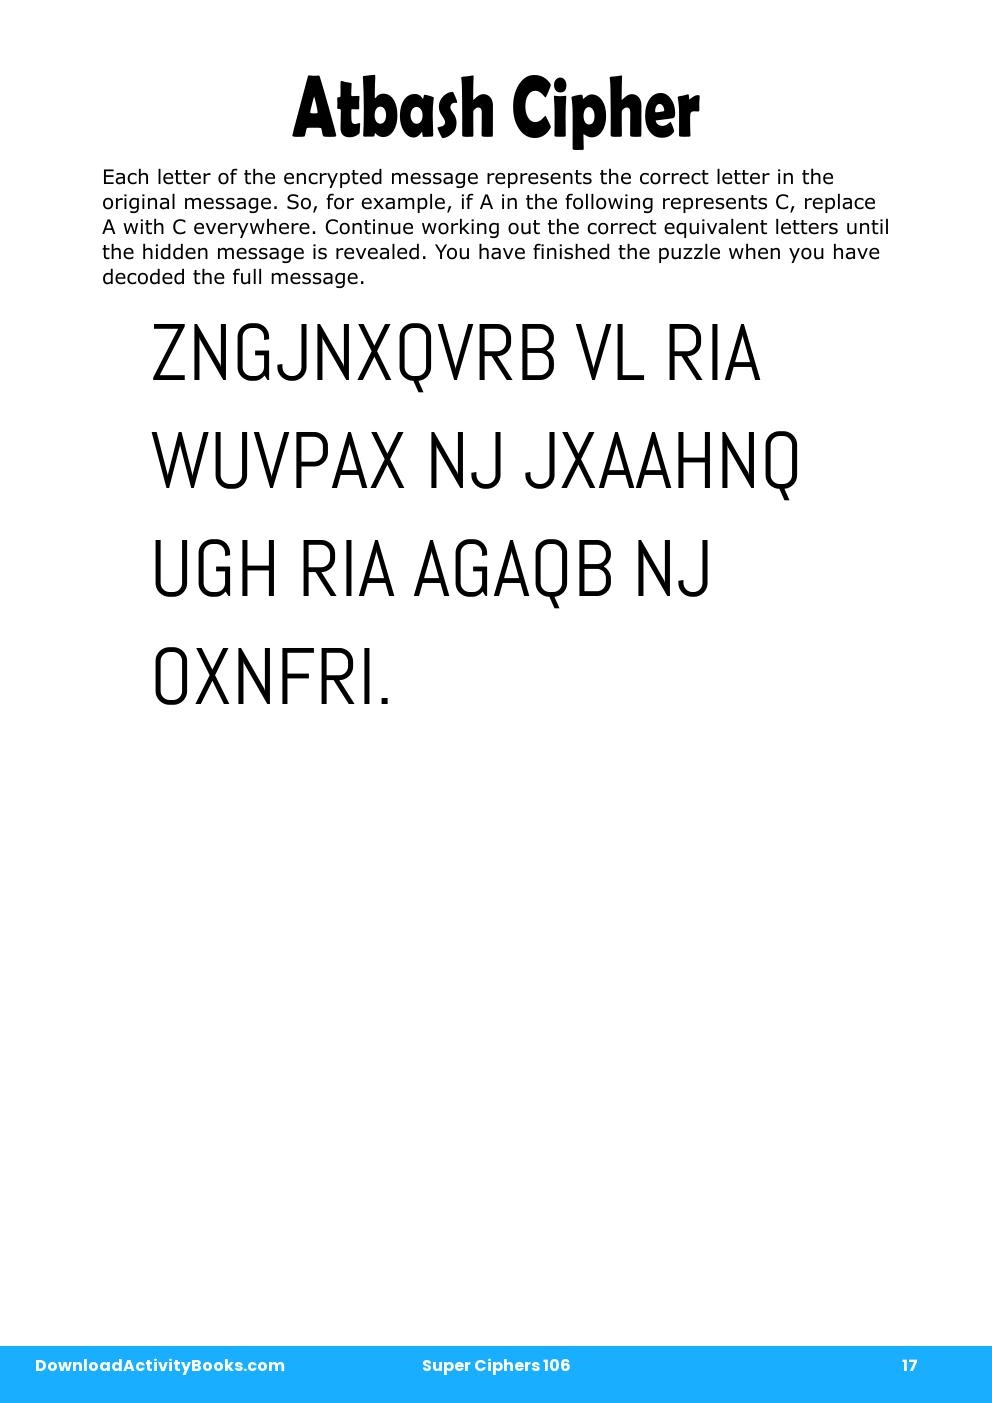 Atbash Cipher in Super Ciphers 106